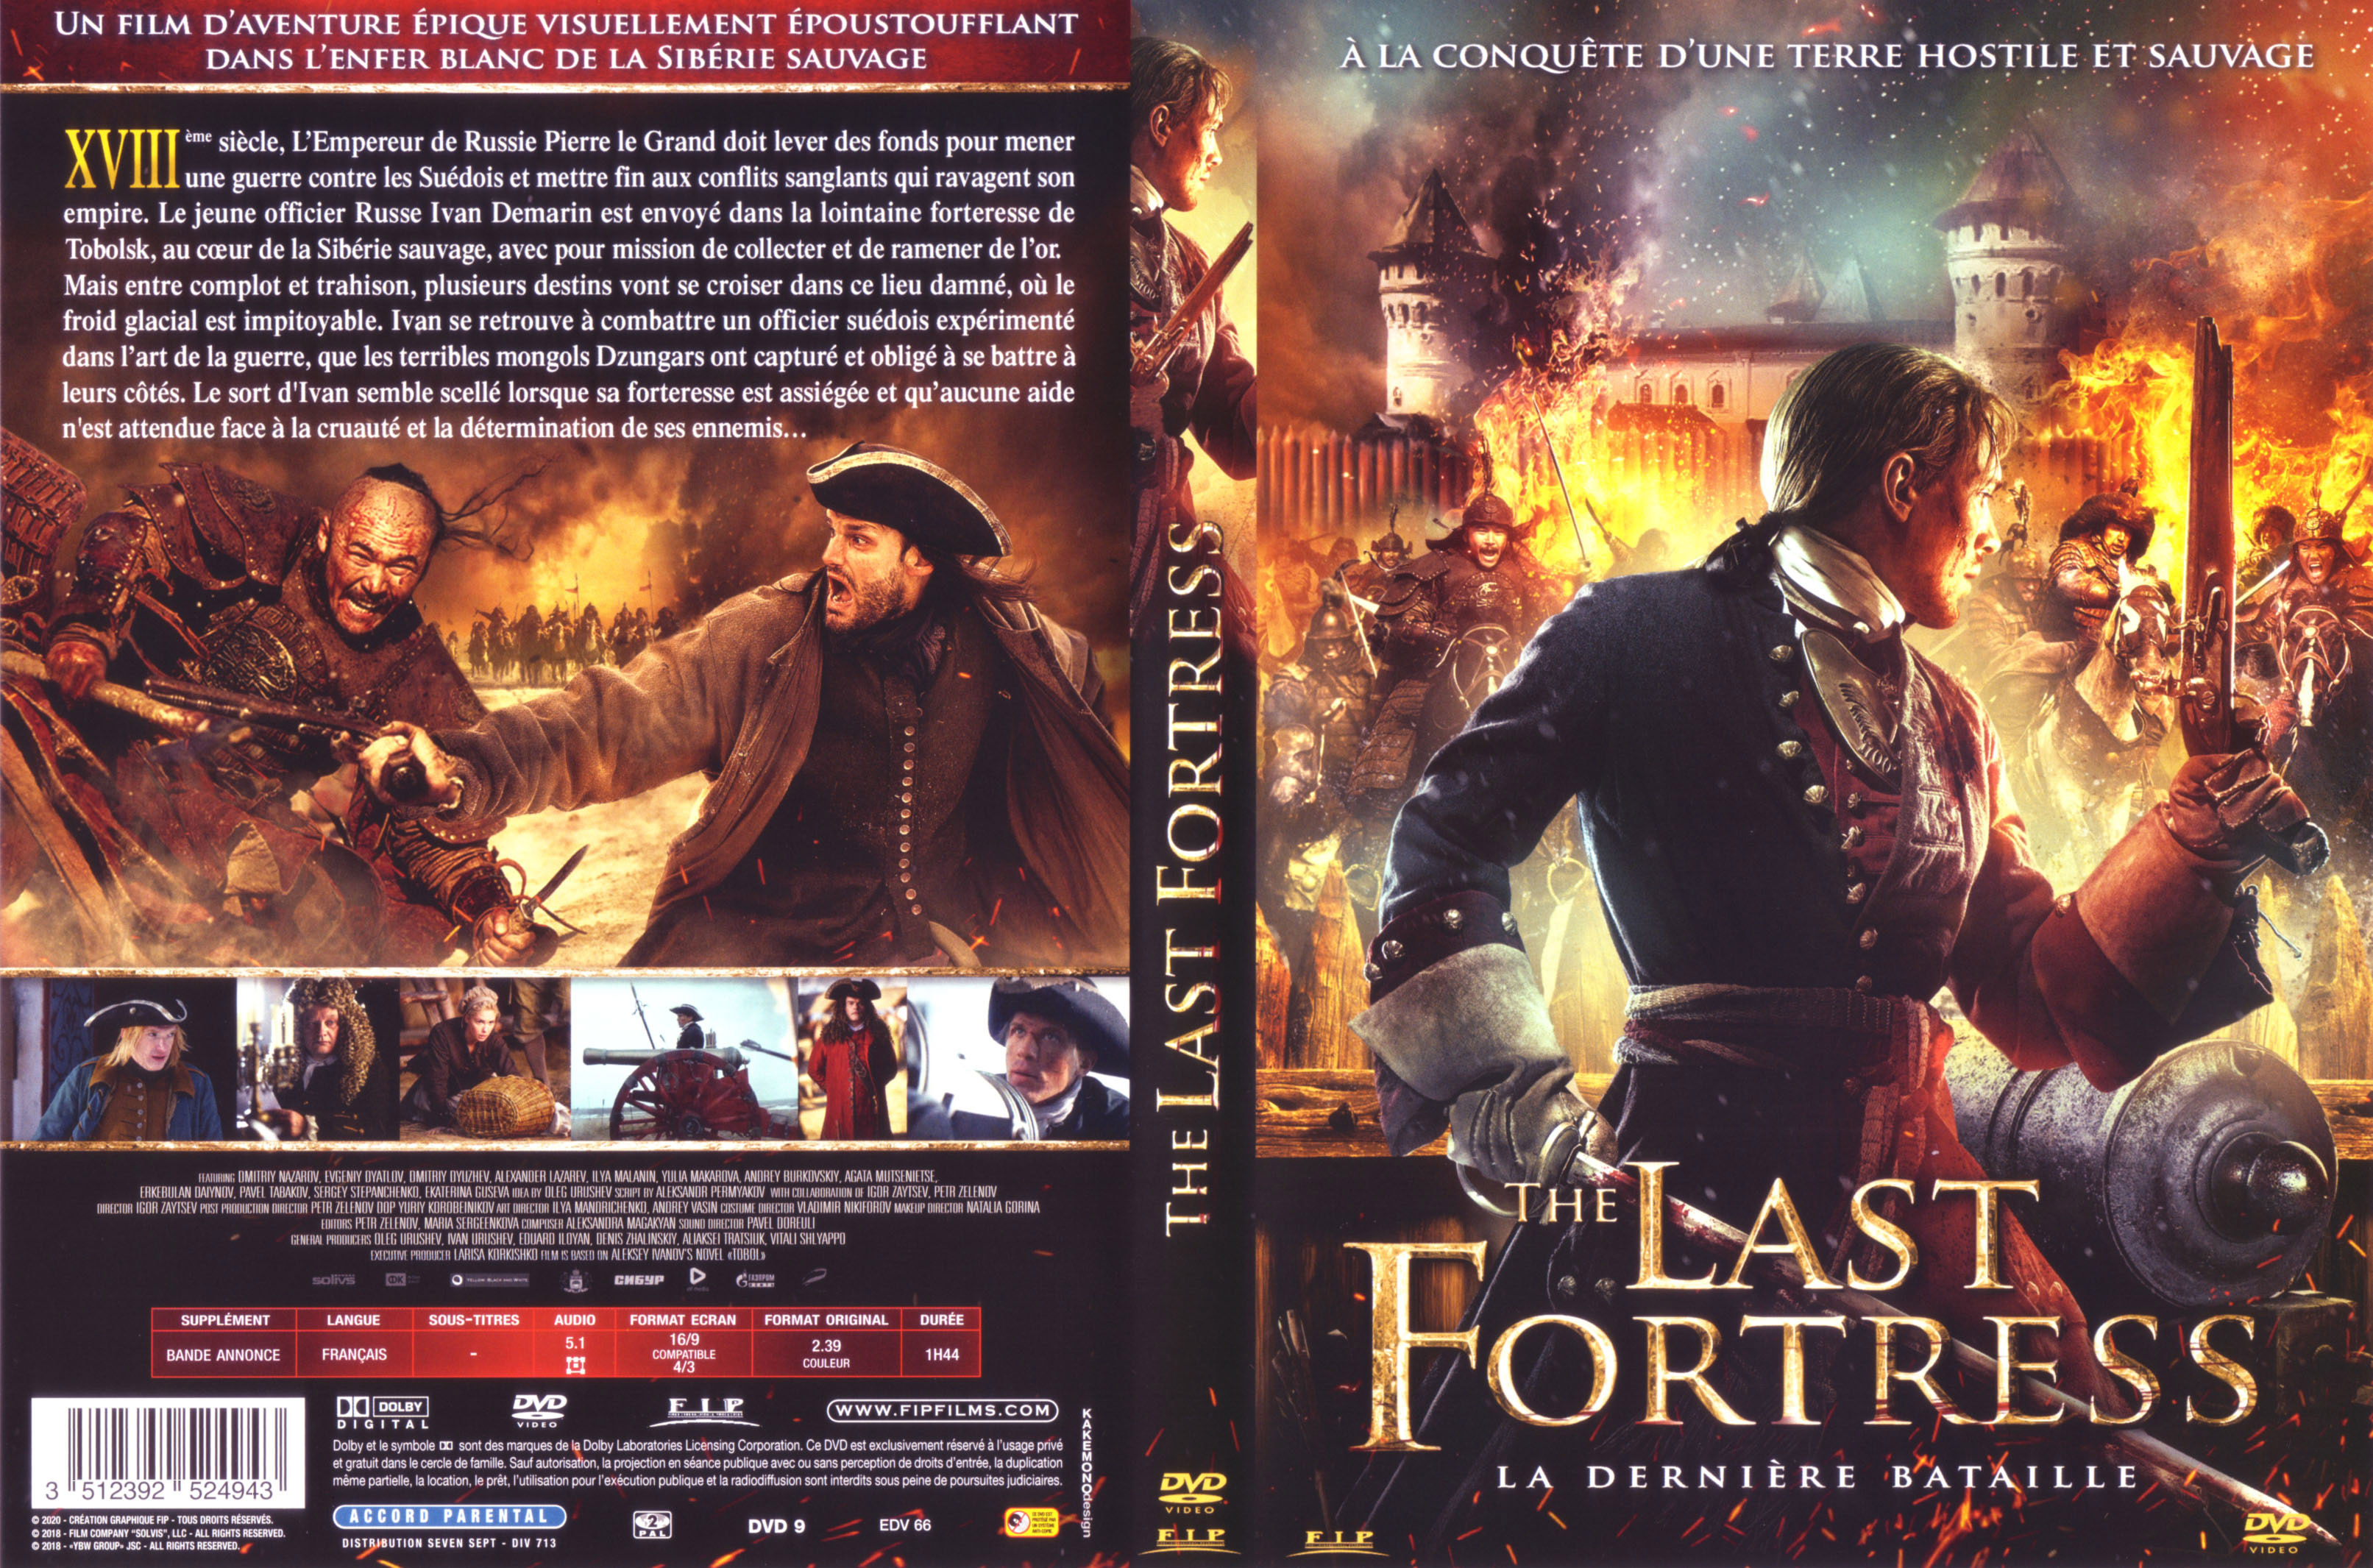 Jaquette DVD The last fortress